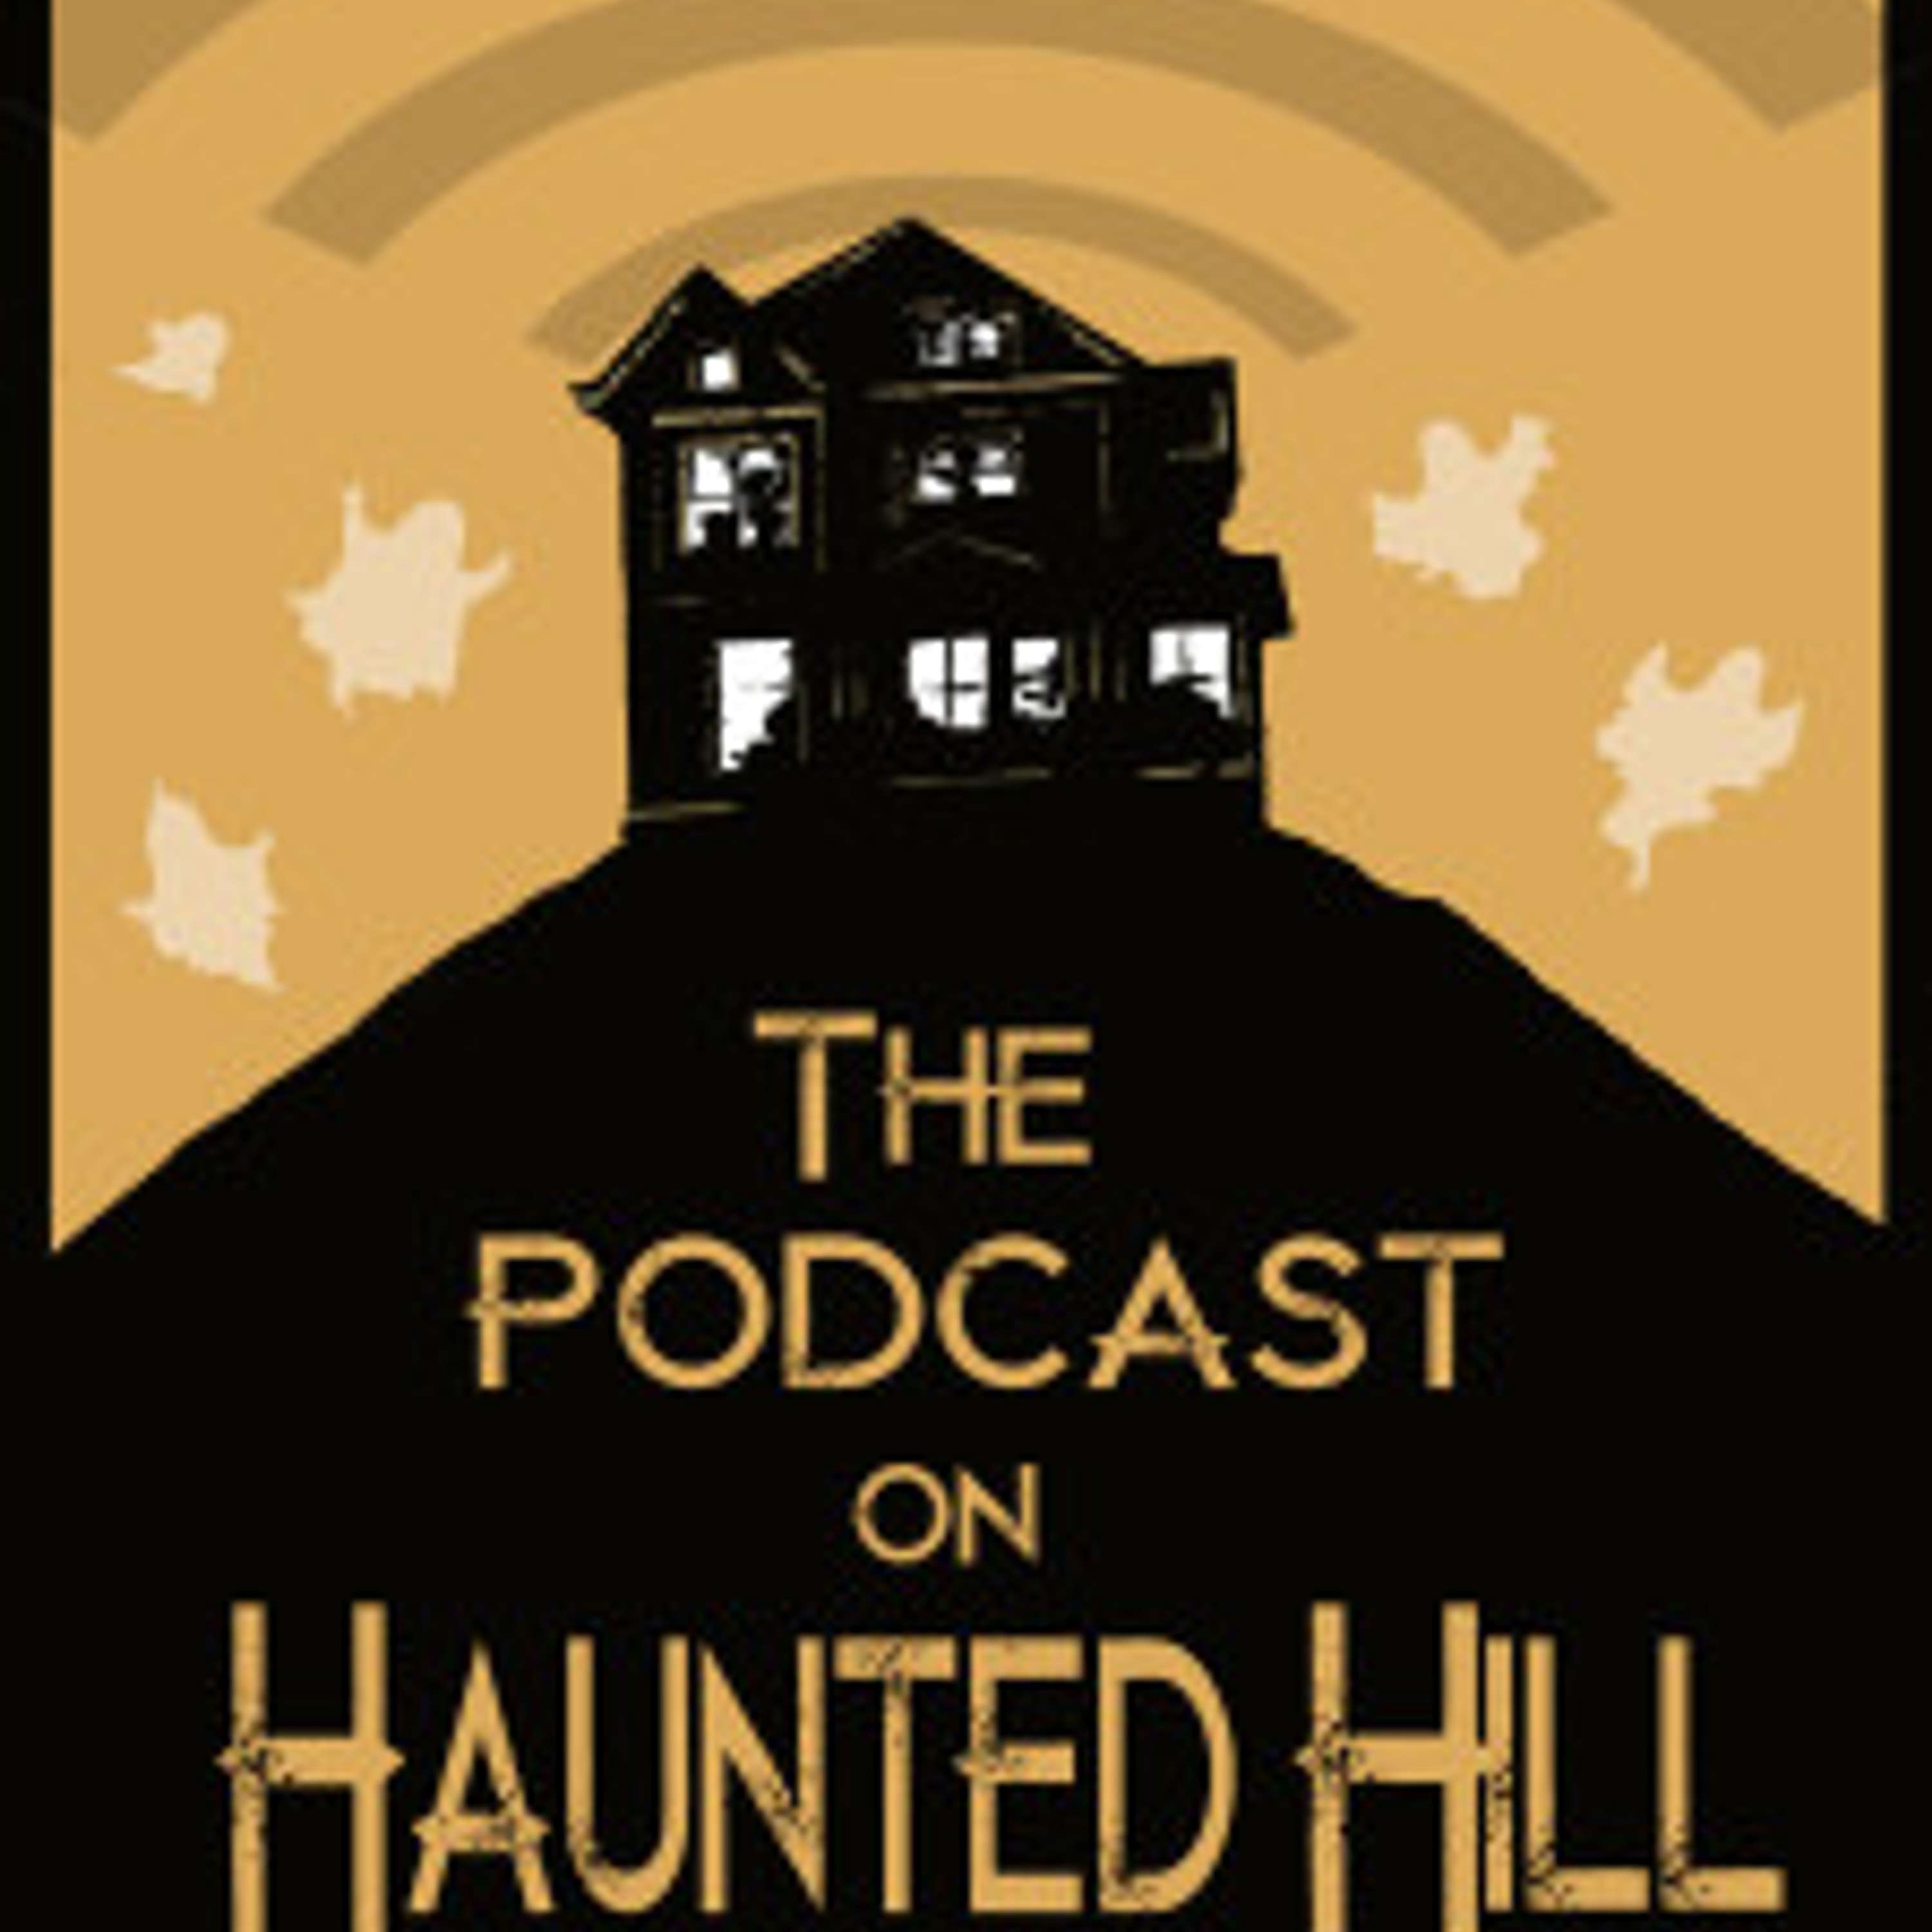 THE PODCAST ON HAUNTED HILL EPISODE 45 – SE7EN AND THE SILENCE OF THE LAMBS